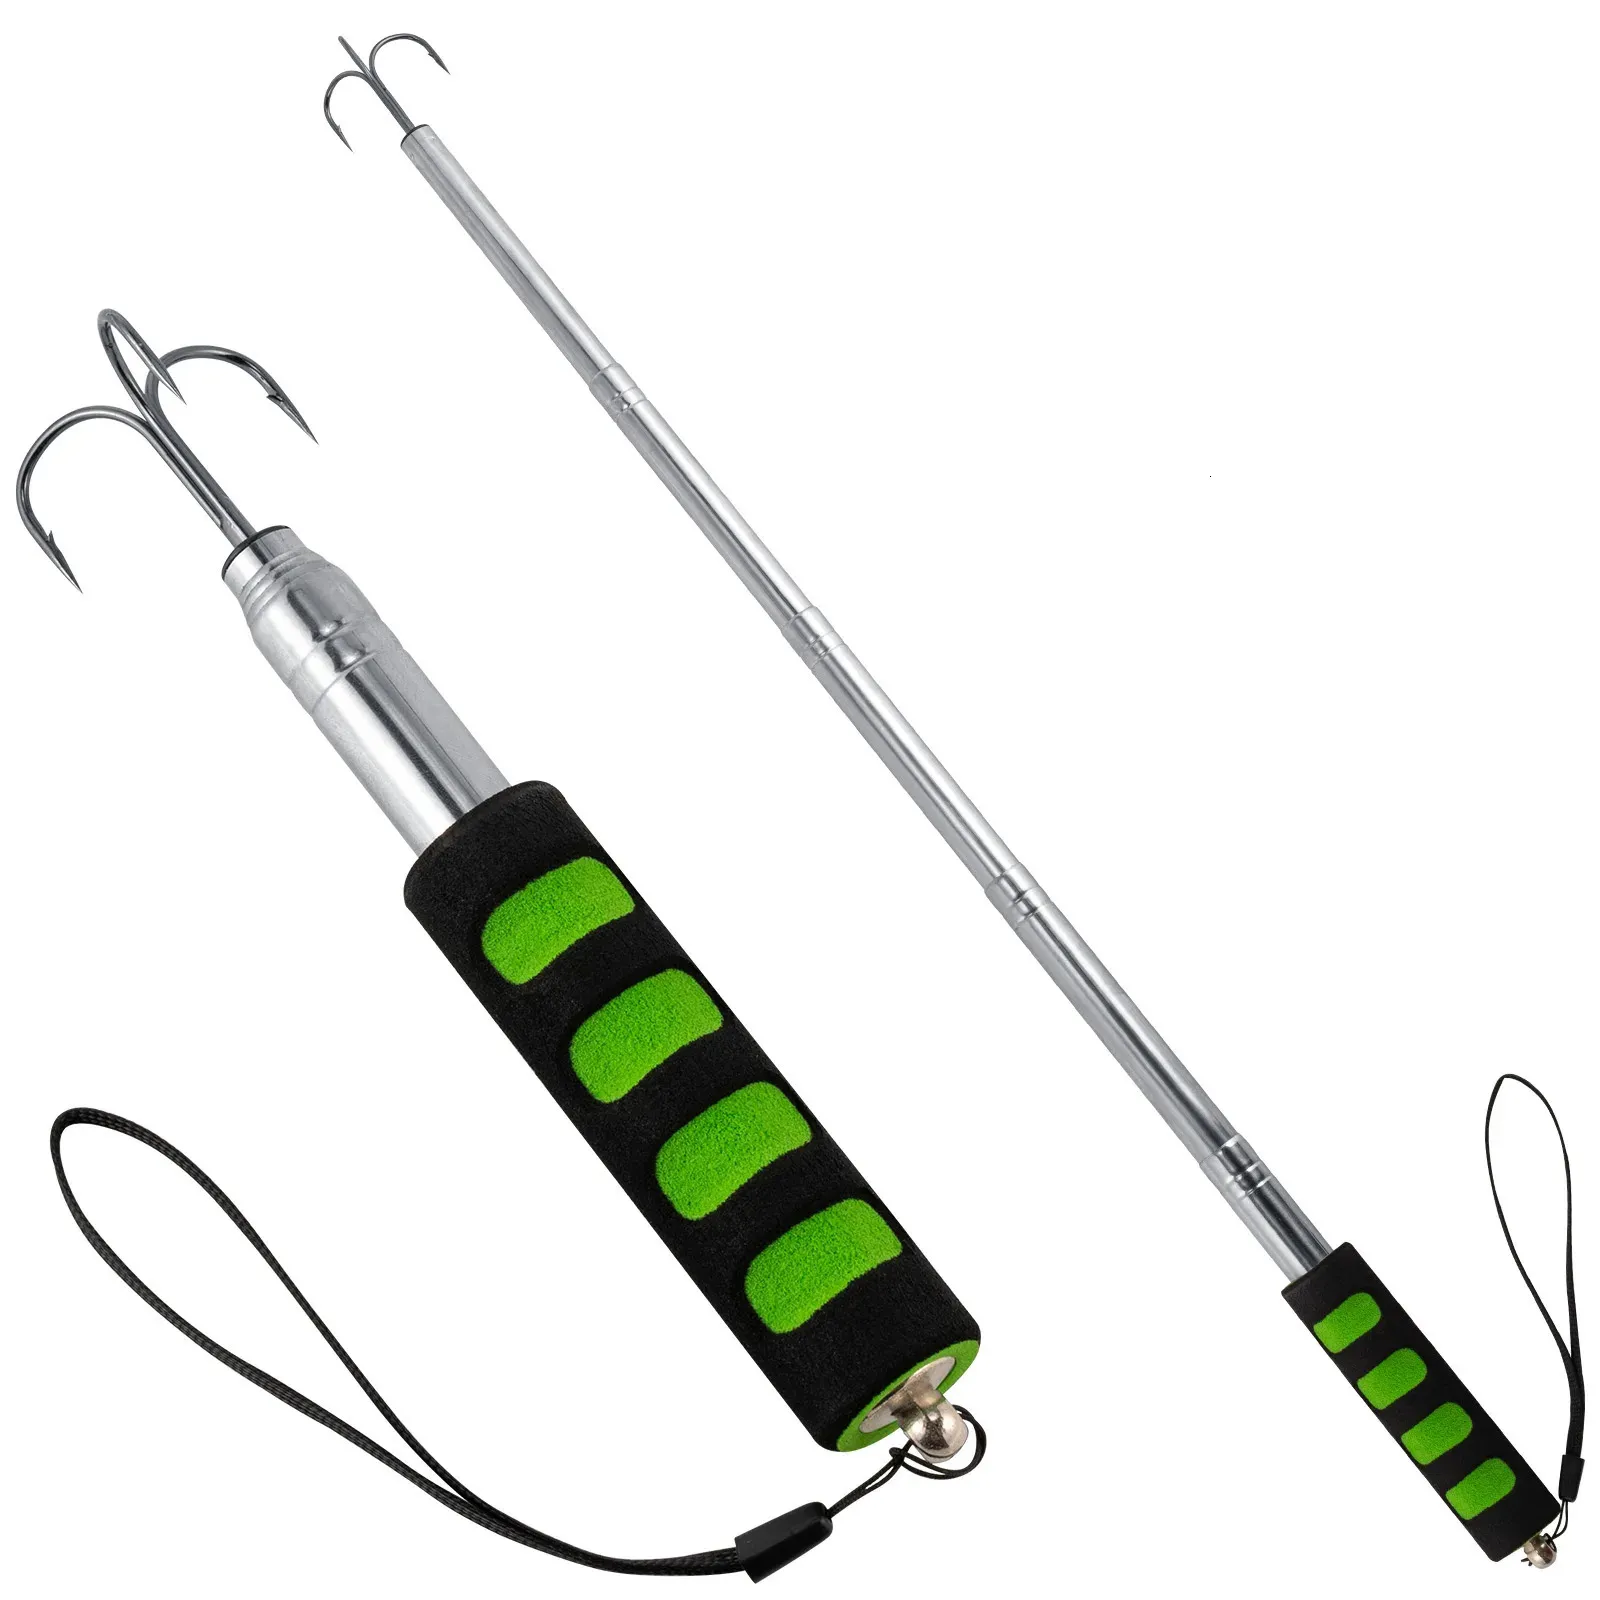 Telescopic Stainless Steel Gaff: 3 Hook Telescoping Pole For Offshore & Ice  Fishing From Bao05, $8.73